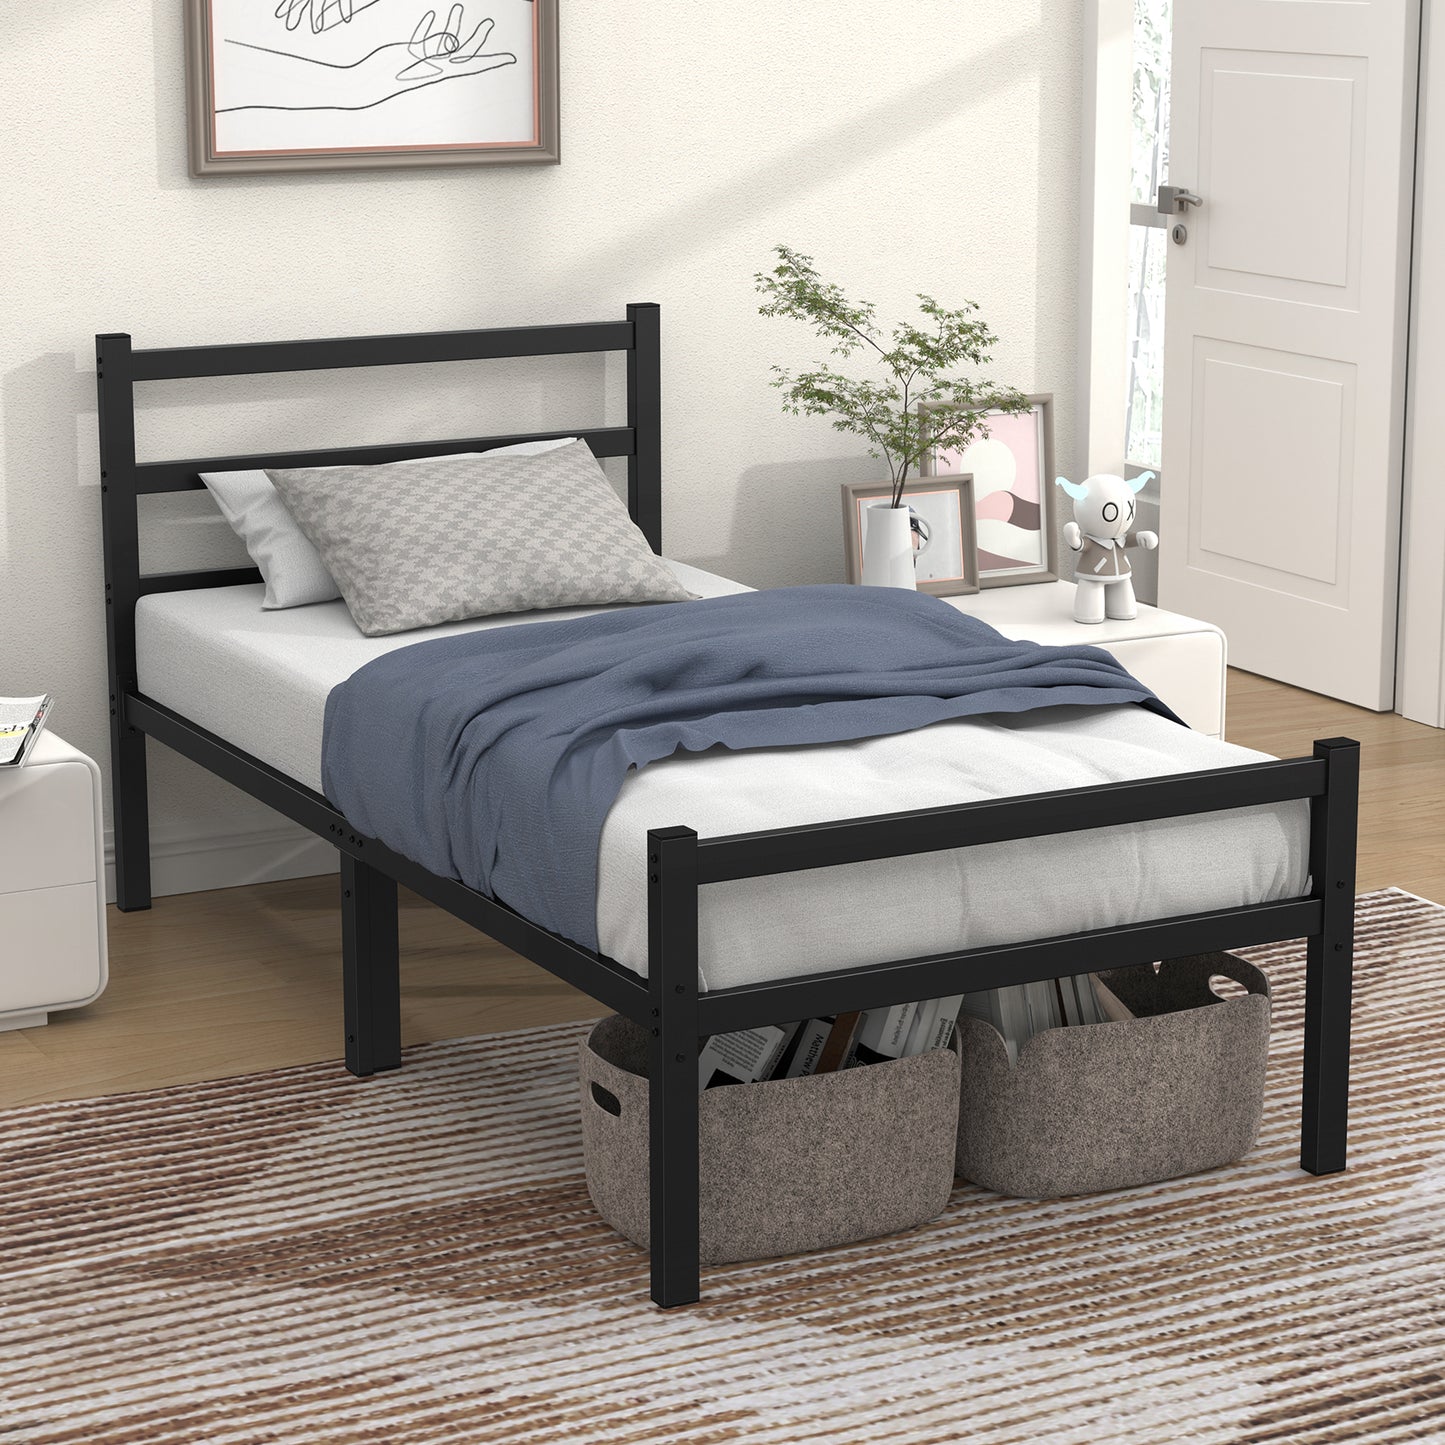 Mr IRONSTONE Twin Bed Frame, 14" High Twin Size Metal Platform Bed Frame with Headboard and Footboard with Storage, No Box Spring Needed, Black